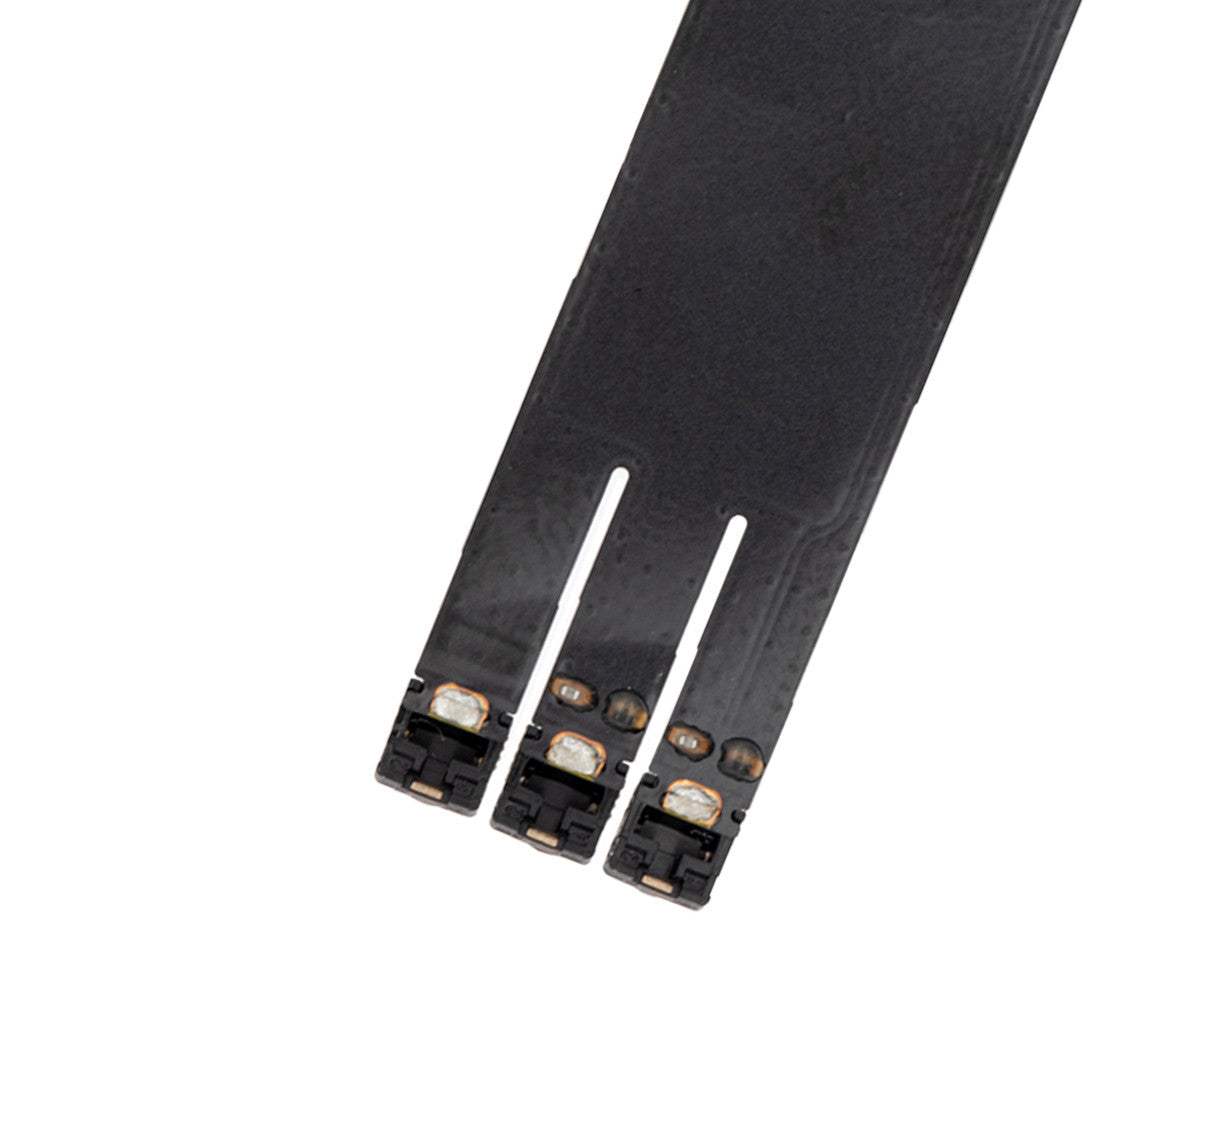 KEYBOARD FLEX CABLE (Black) COMPATIBLE WITH IPAD AIR 3